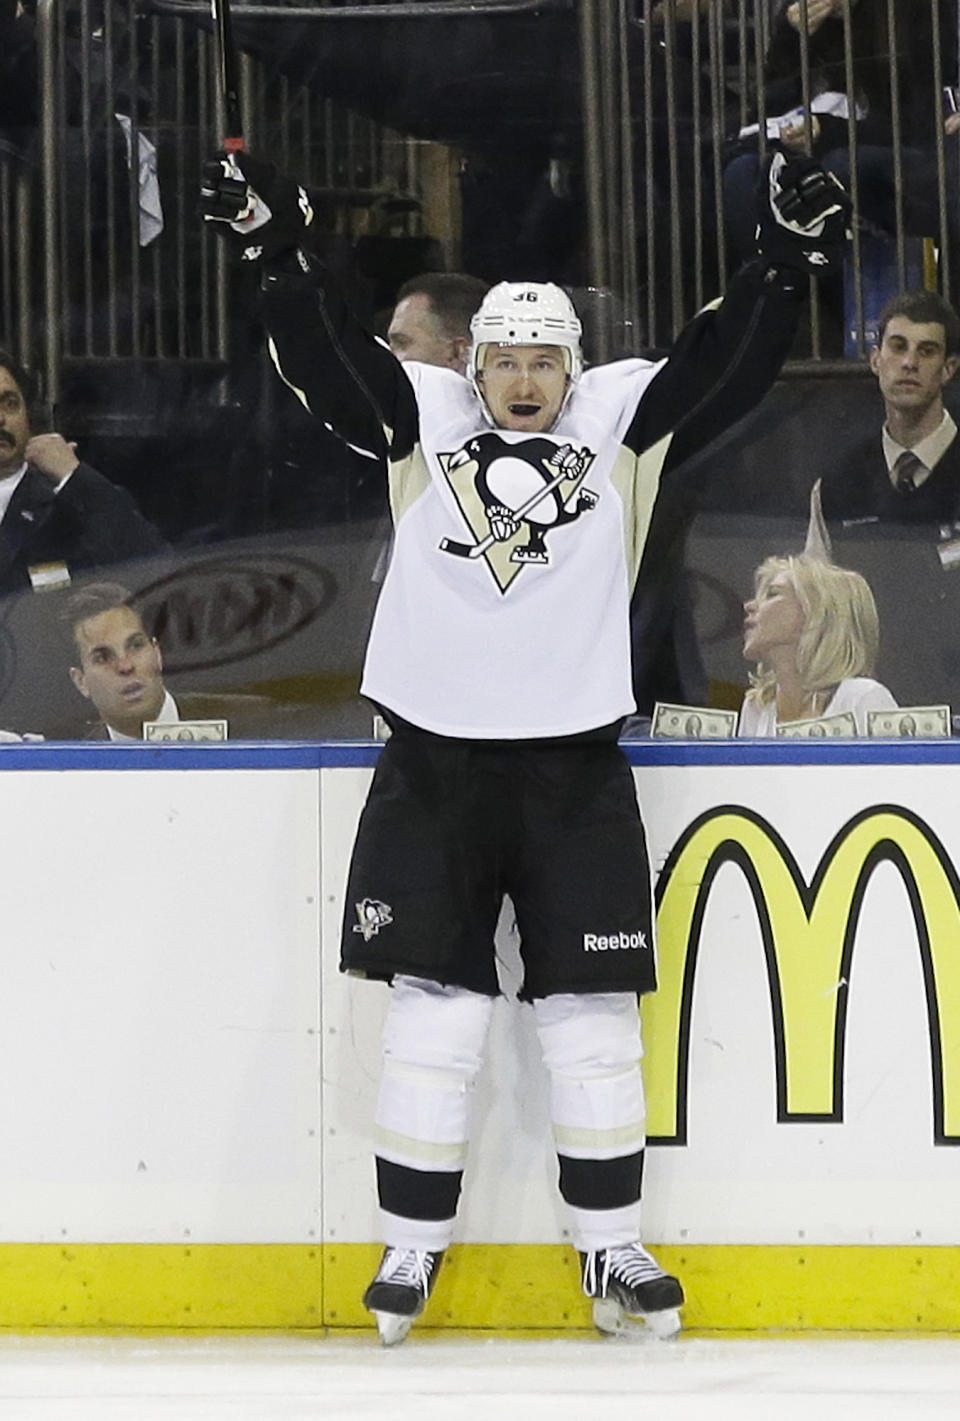 Pittsburgh Penguins' Jussi Jokinen (36), of Finland, celebrates after scoring a goal during the third period of a second-round NHL Stanley Cup hockey playoff series against the New York Rangers, Wednesday, May 7, 2014, in New York. The Penguins won 4-2. (AP Photo/Frank Franklin II)